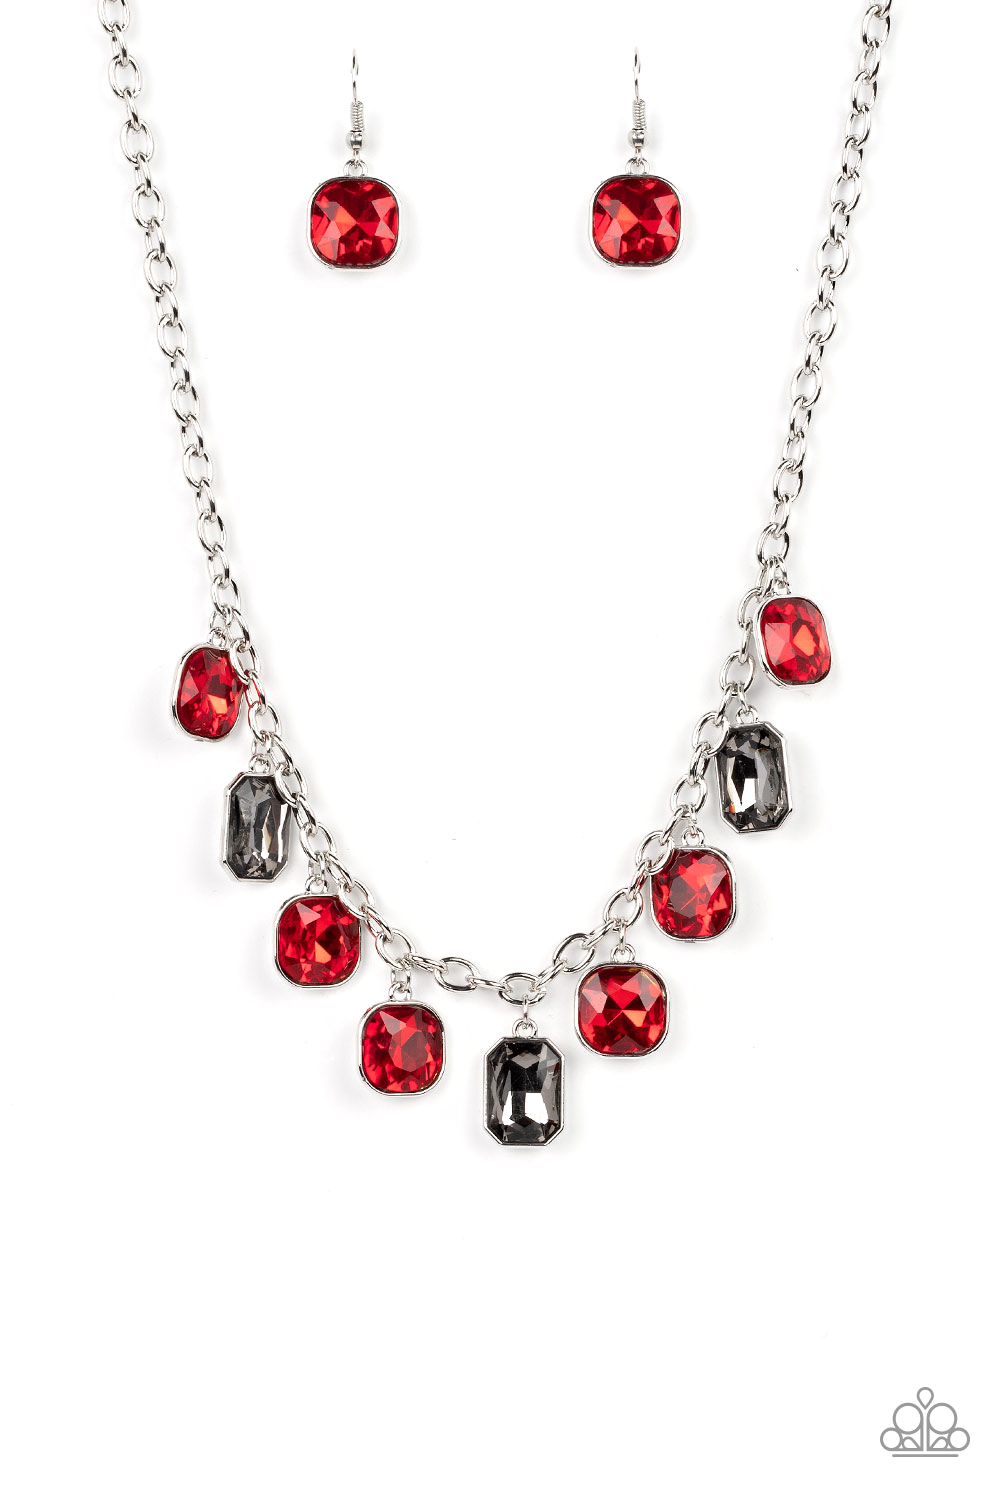 Necklace - Best Decision Ever - Red